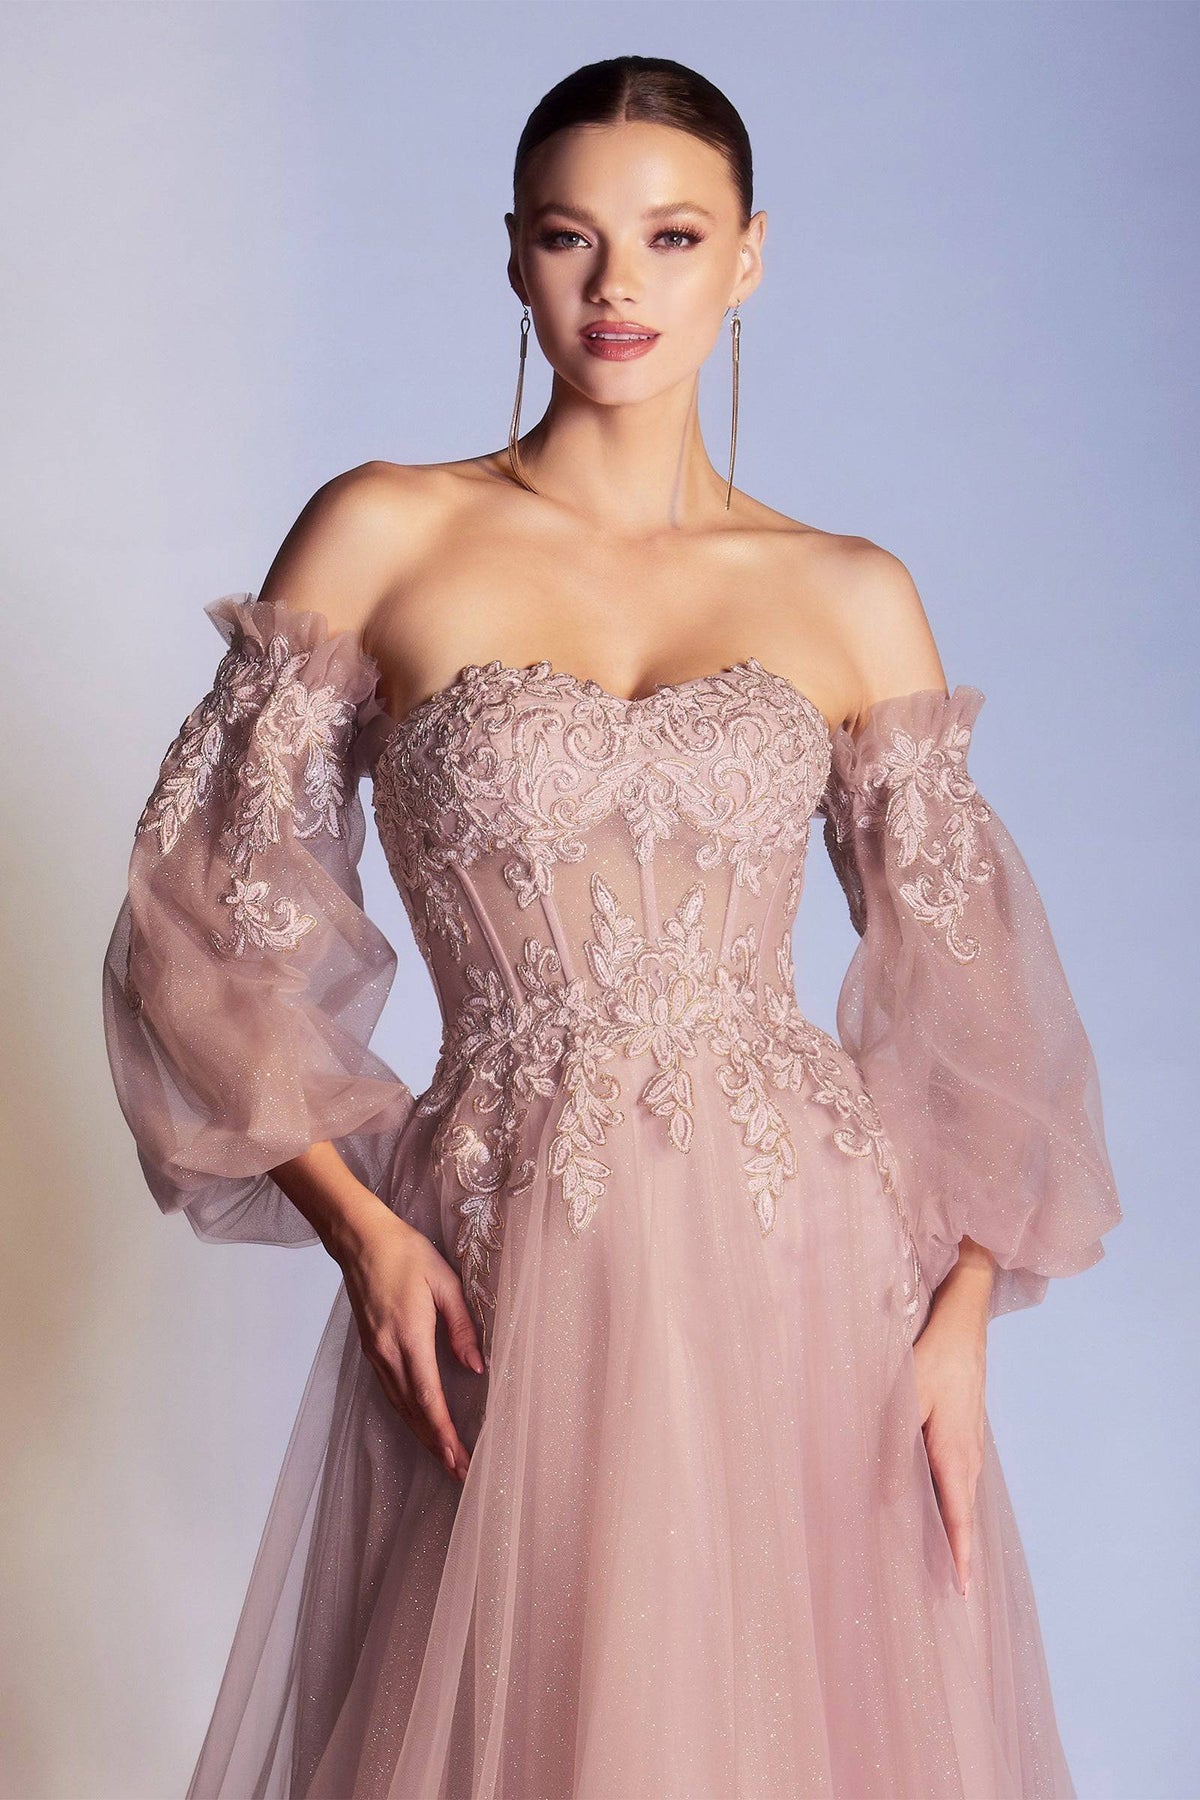 Opulent Off Shoulder Embroidered Gown with Puffy Sleeves and Long Skirt #CDCD948 - NORMA REED